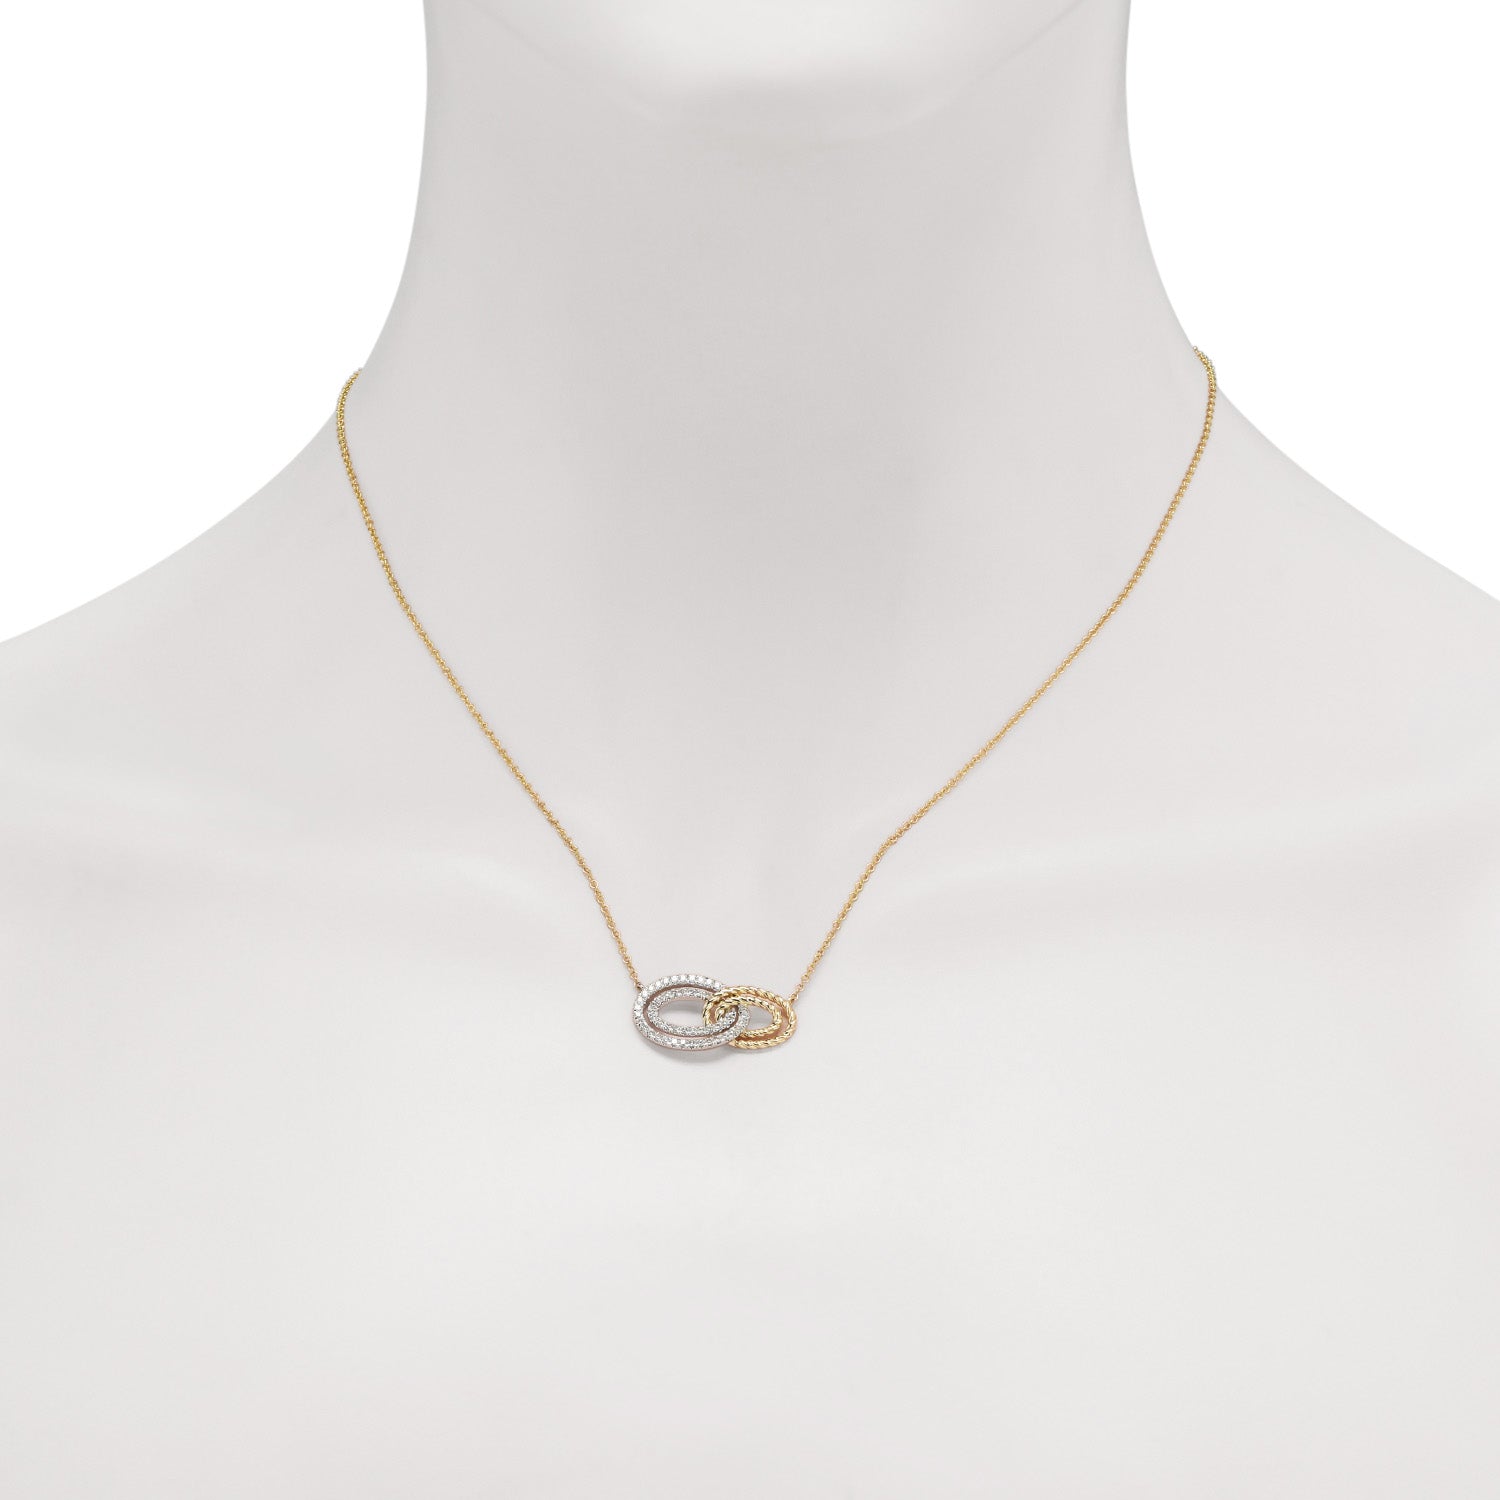 Gabriel Diamond Interlocking Oval Necklace in 14kt Yellow and White Gold (1/4ct tw)